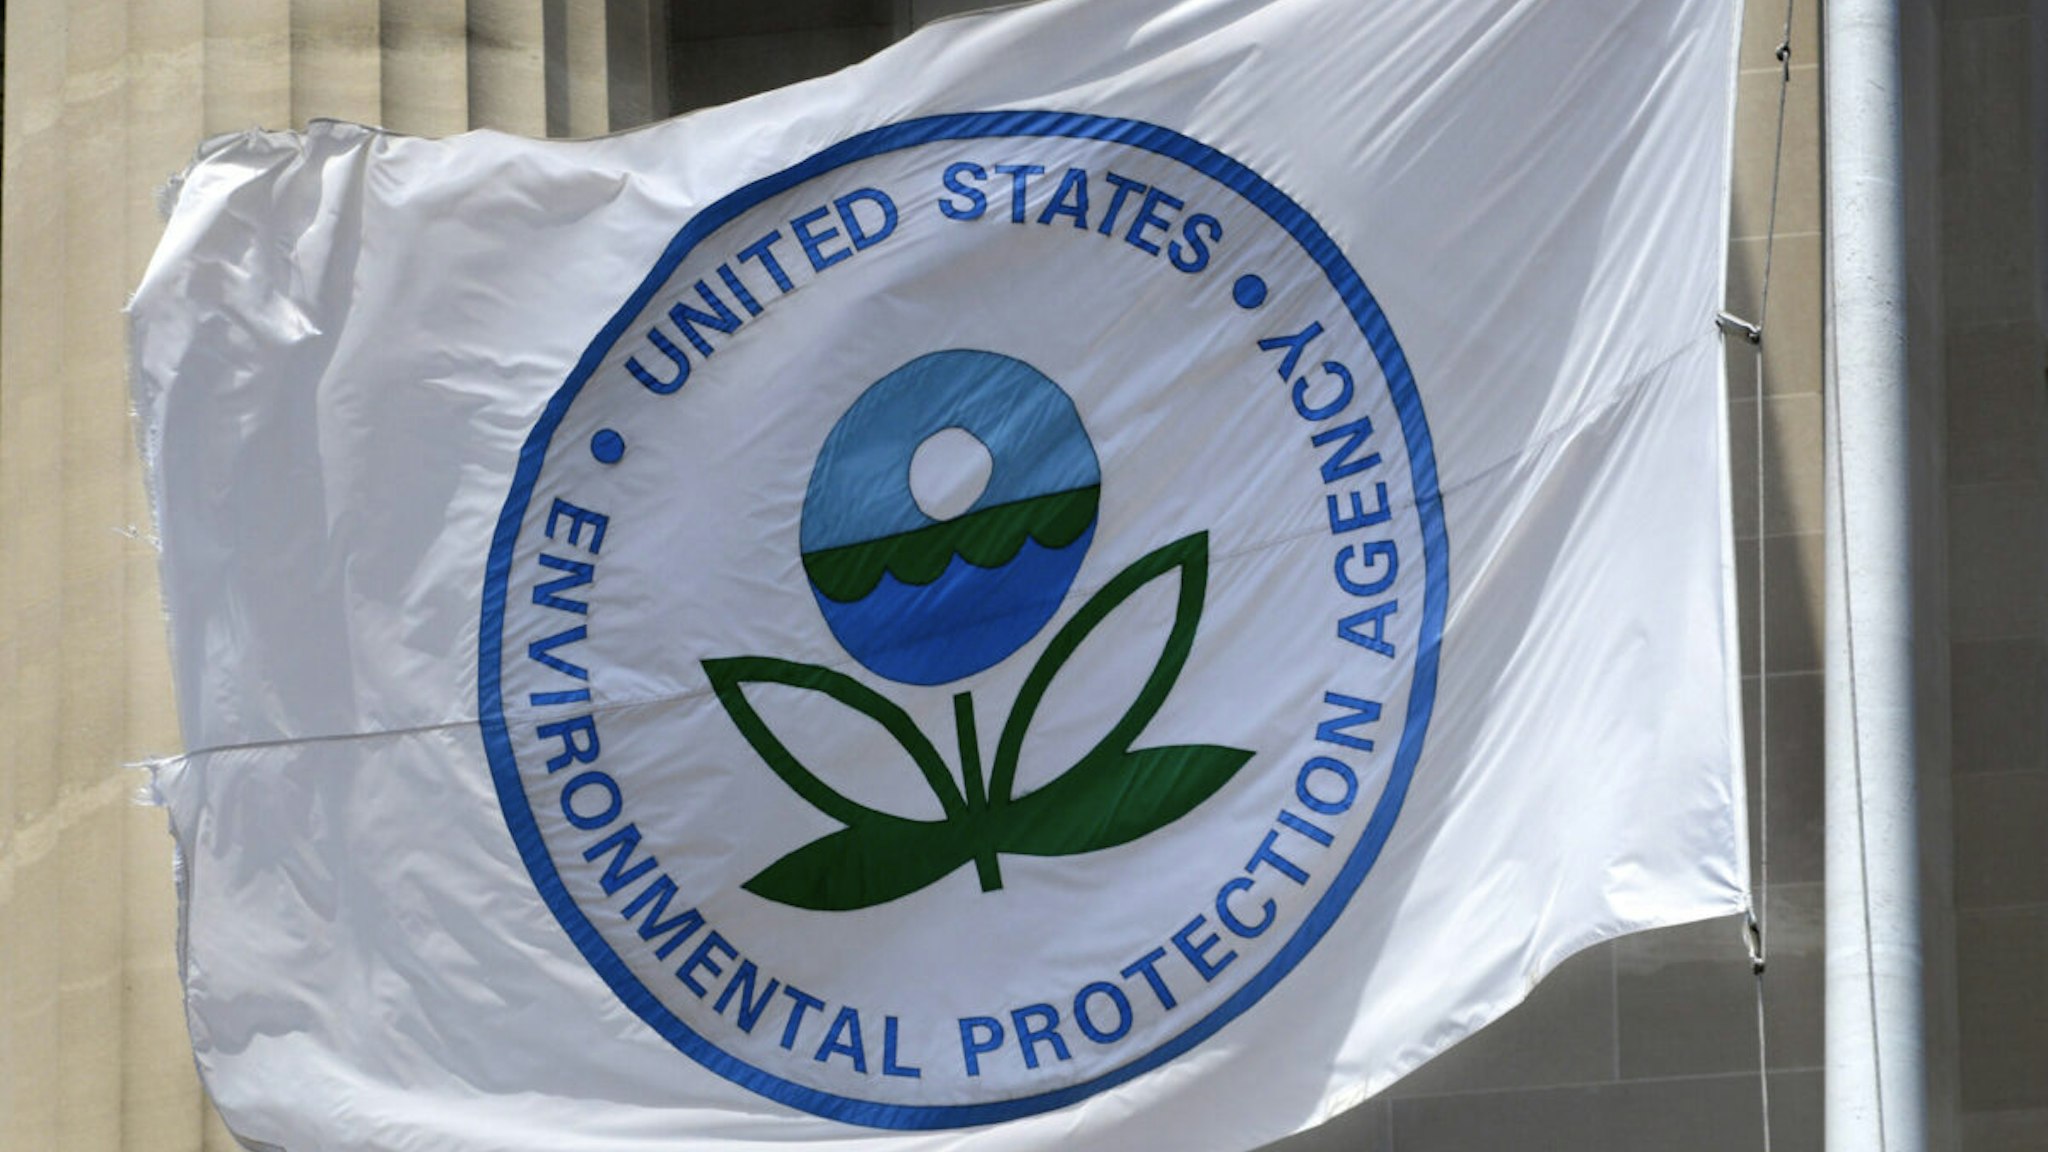 A flag with the United States Environmental Protection Agency (EPA) logo flies at the agency's headquarters in Washington, D.C.